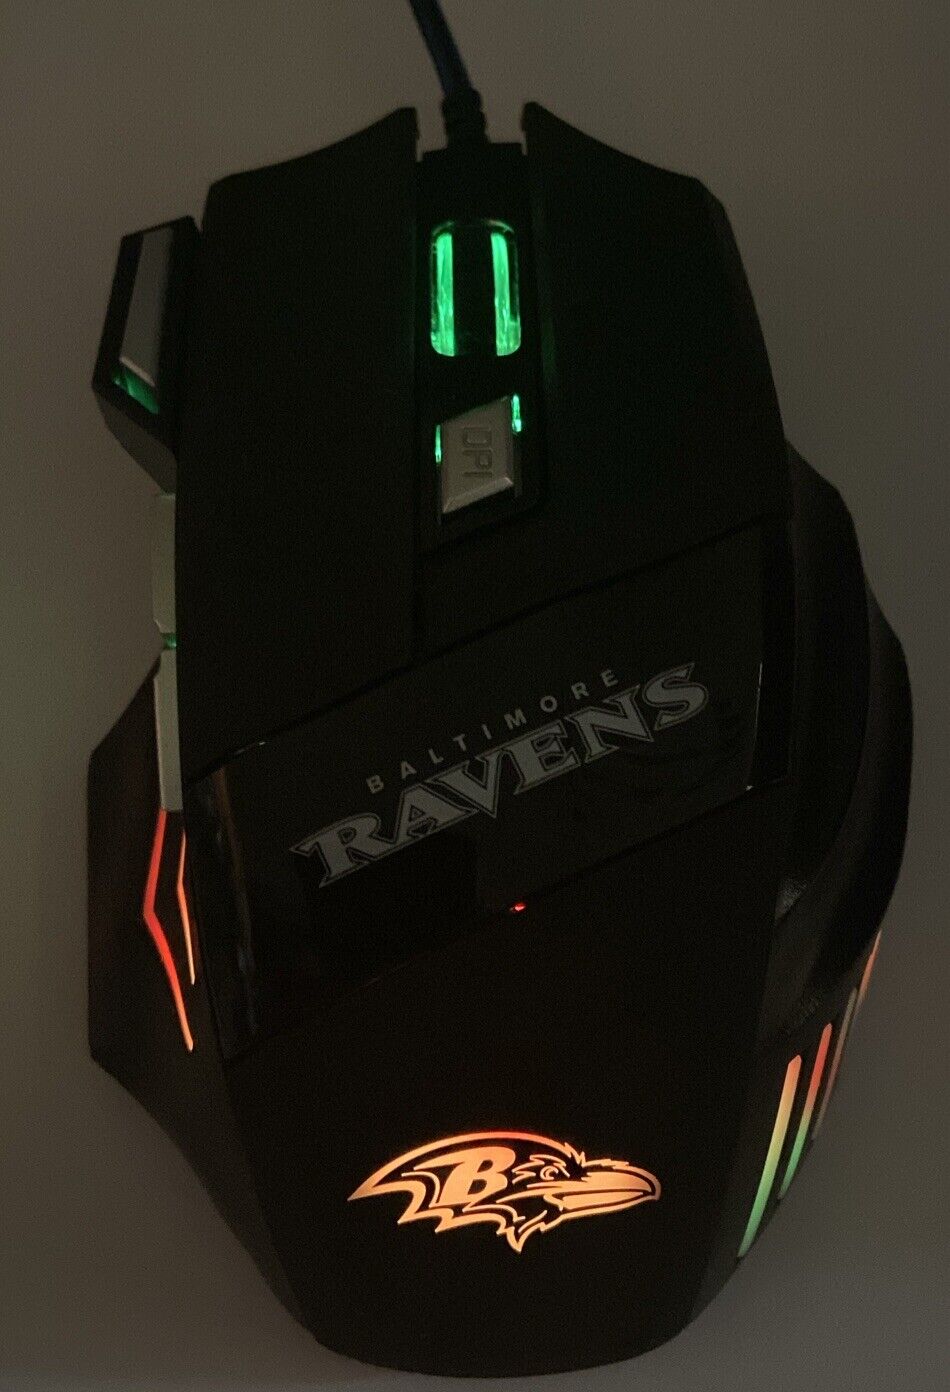 BALTIMORE RAVENS GAMING WIRED MOUSE MODEL RGX-M2-BLK 7200DPI 7 BUTTON 5V 100mA